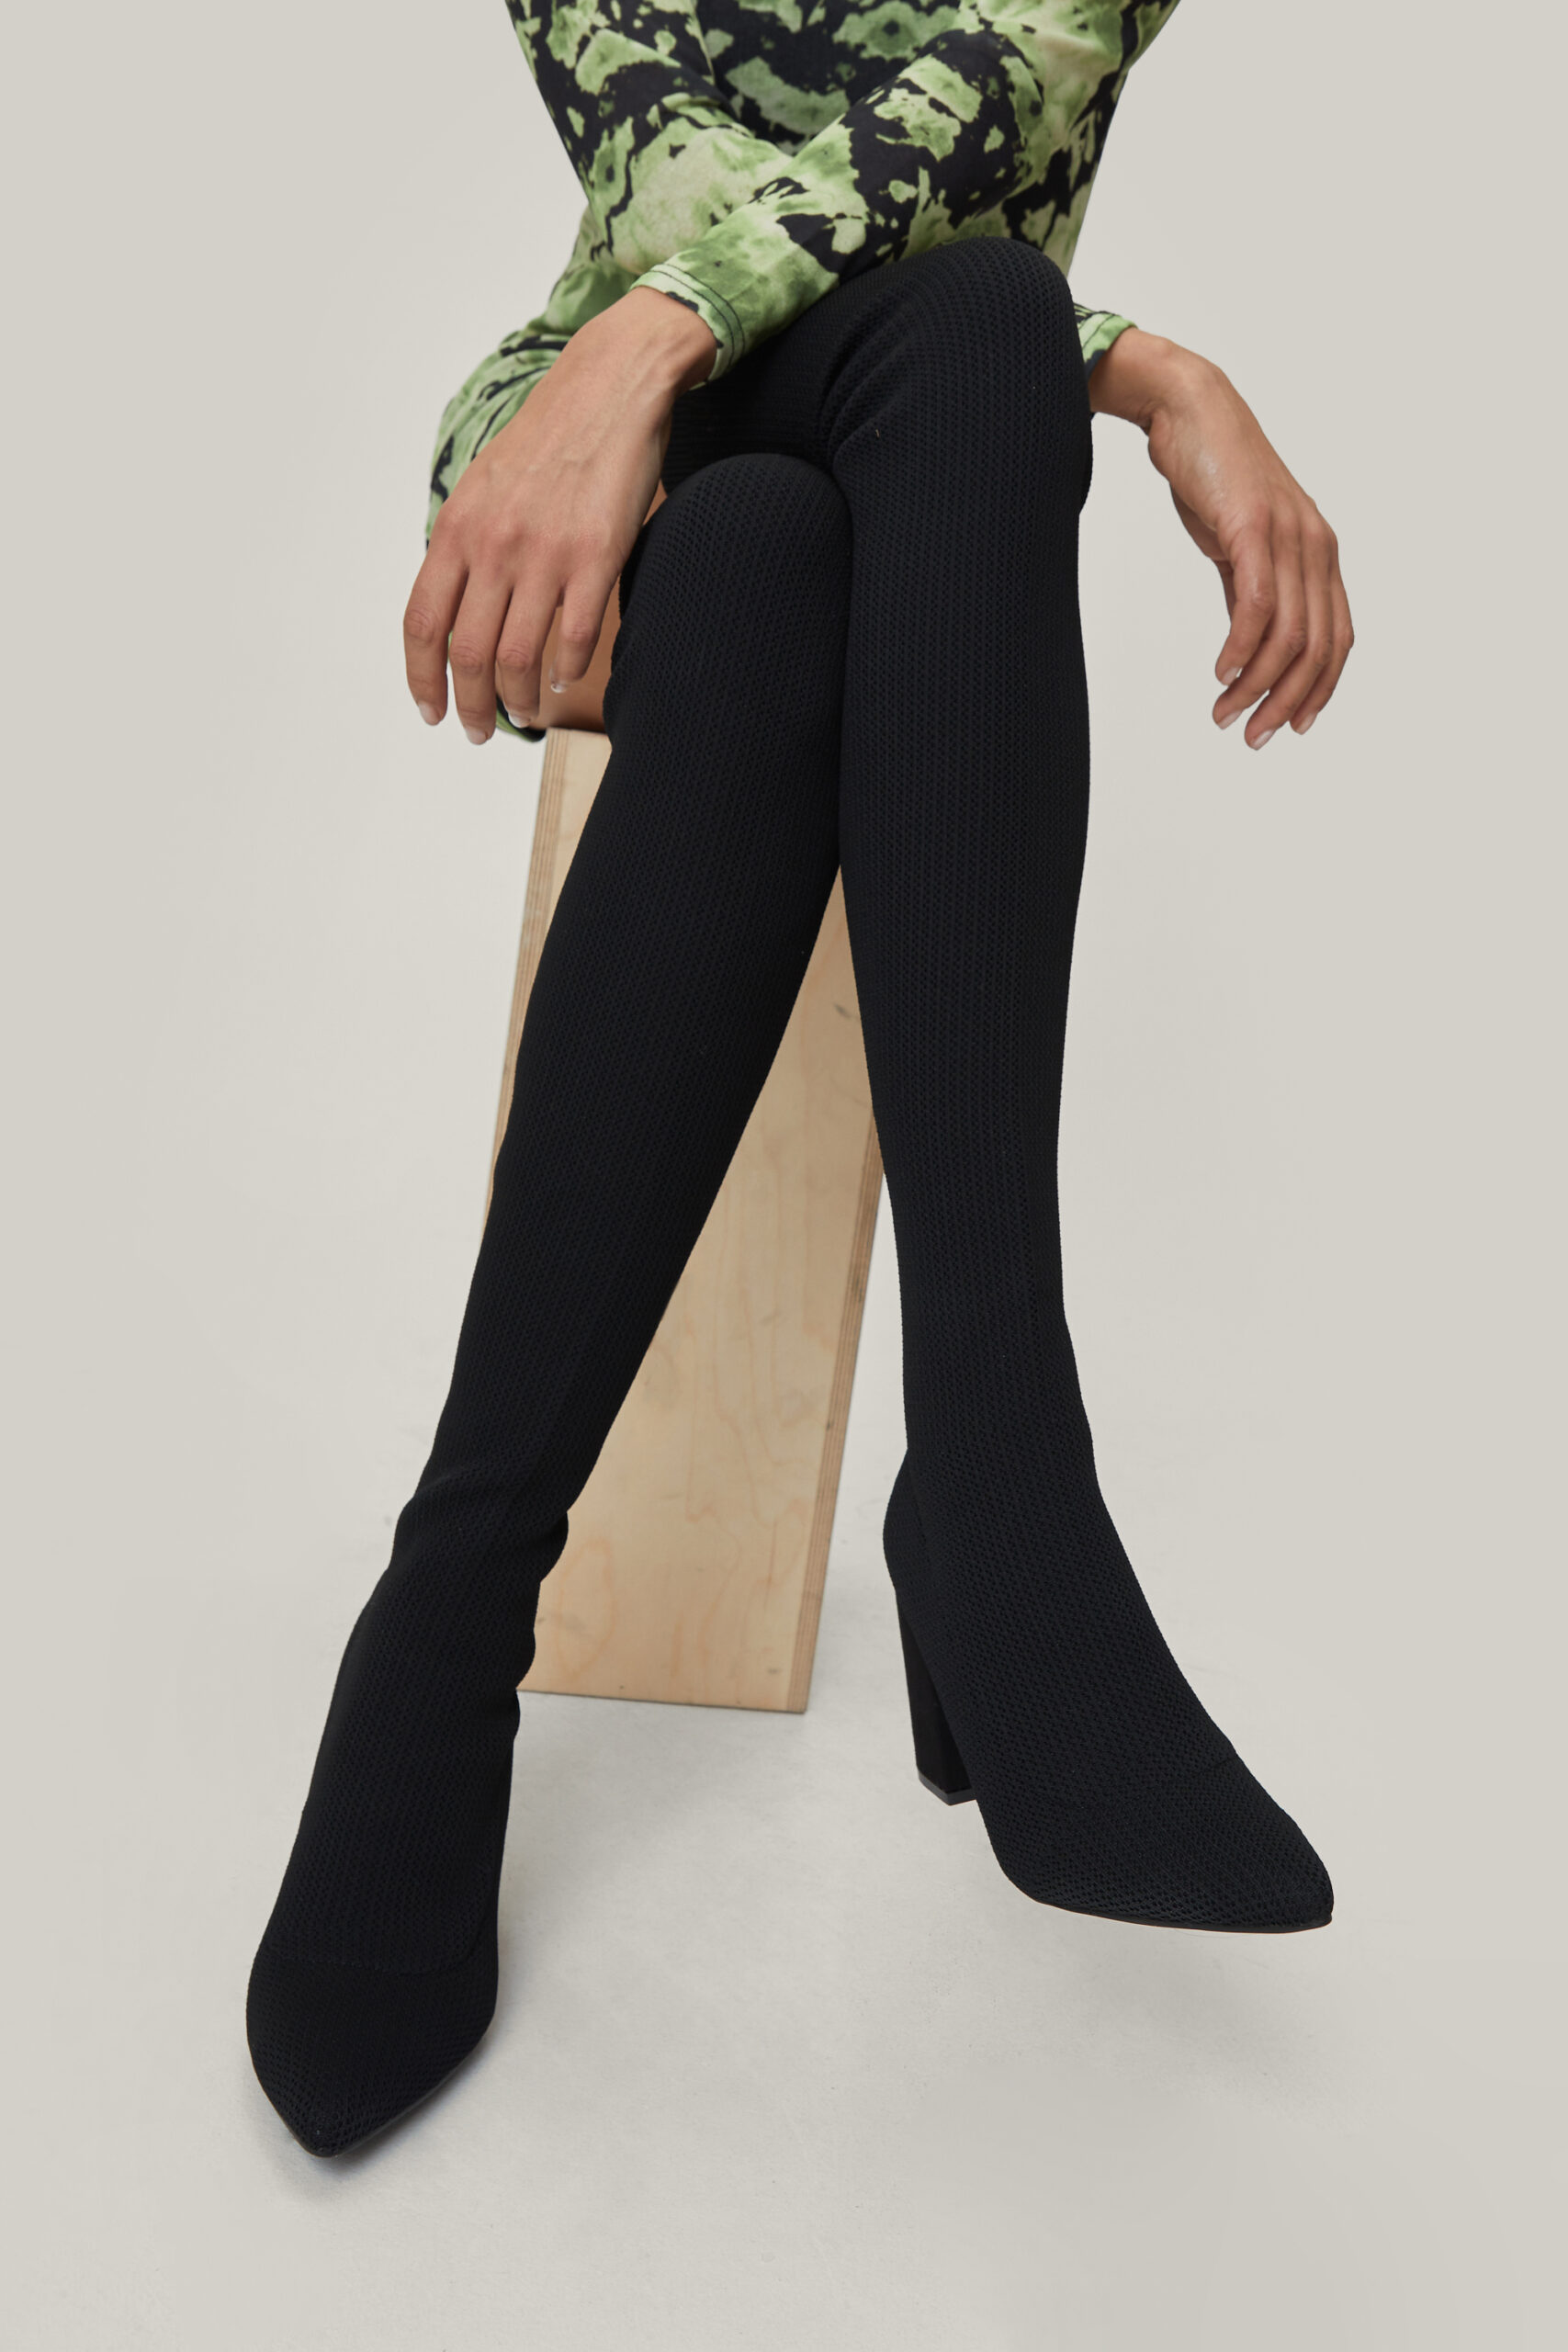 Stretch Knit Over The Knee Block Heel Boots 